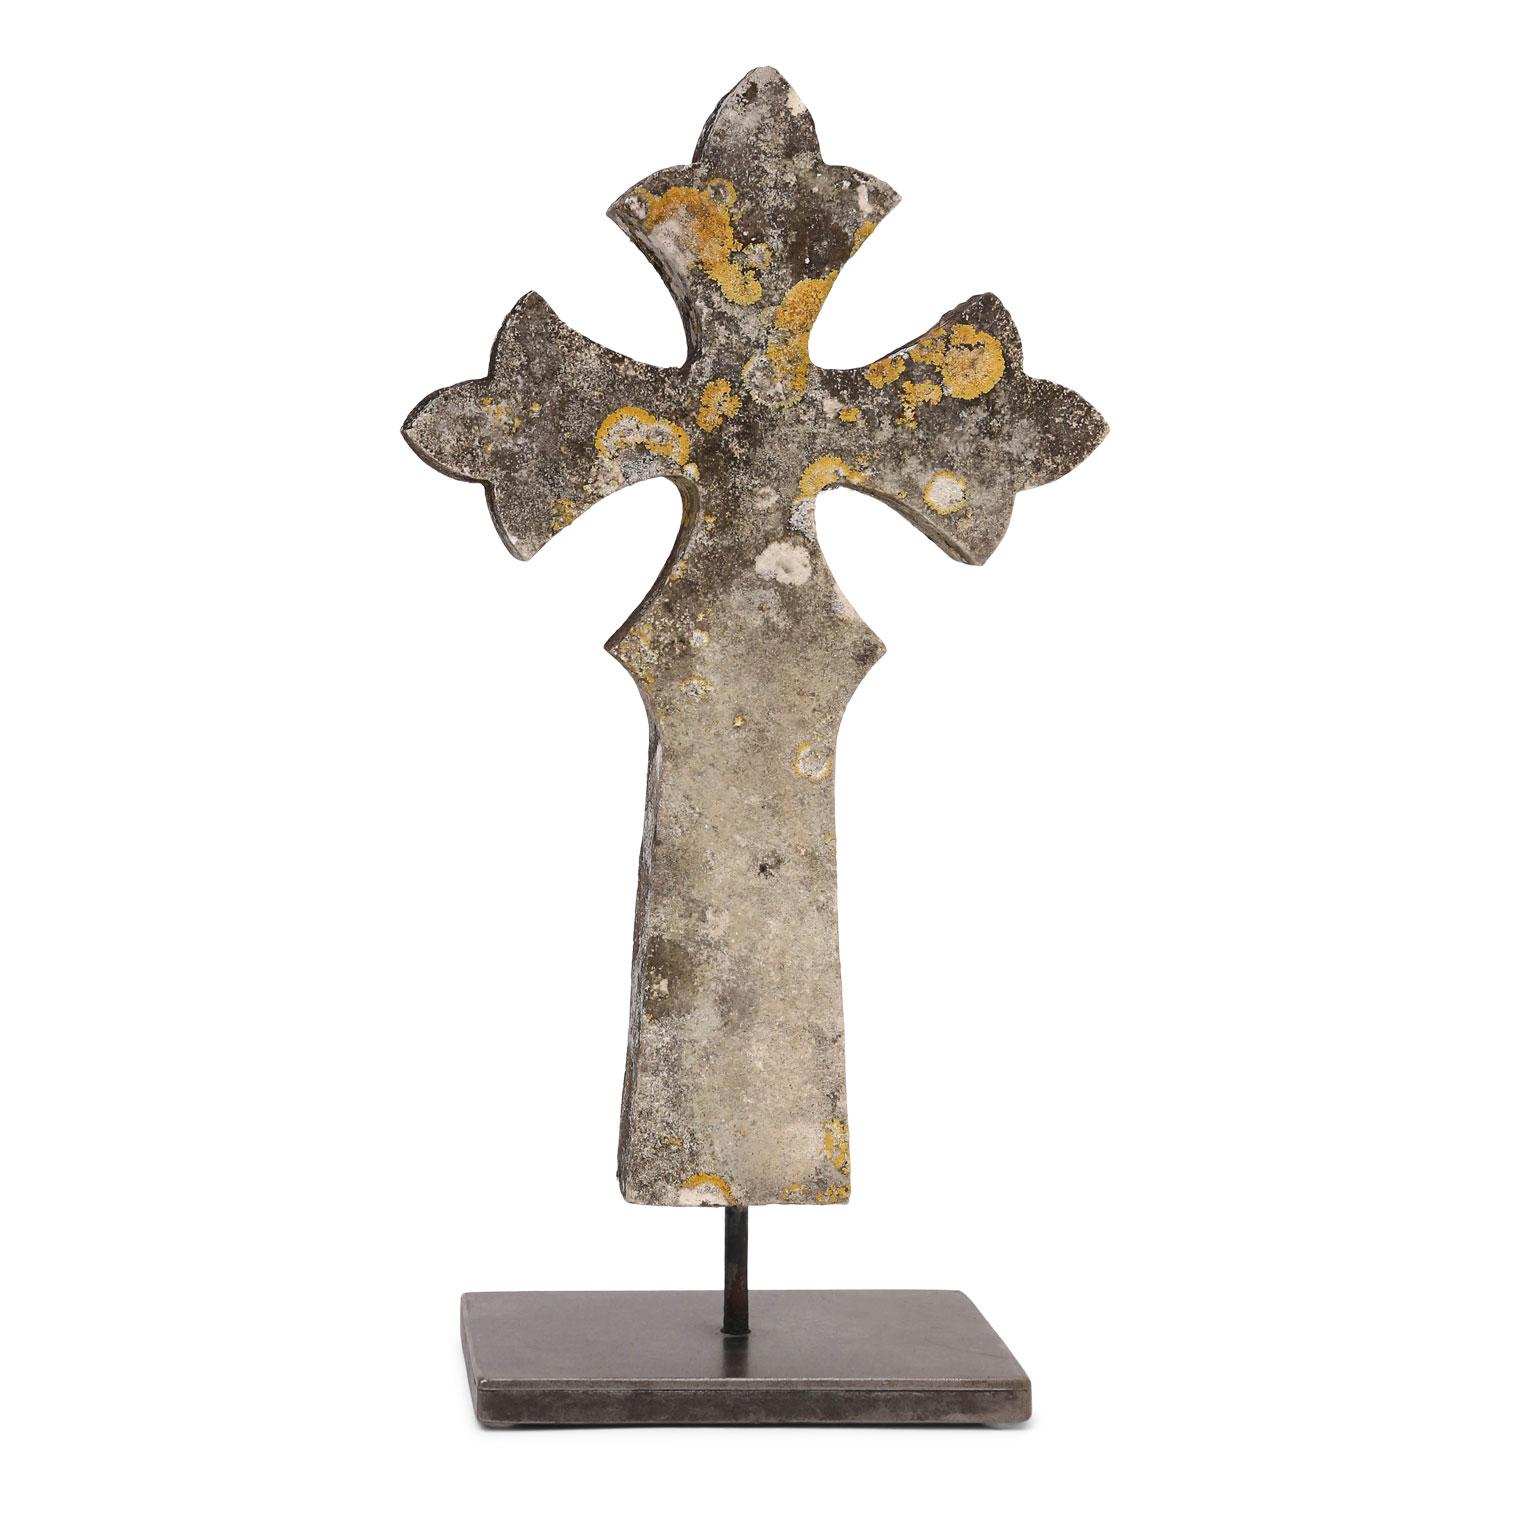 English Stone Cross Mounted on Steel Stand